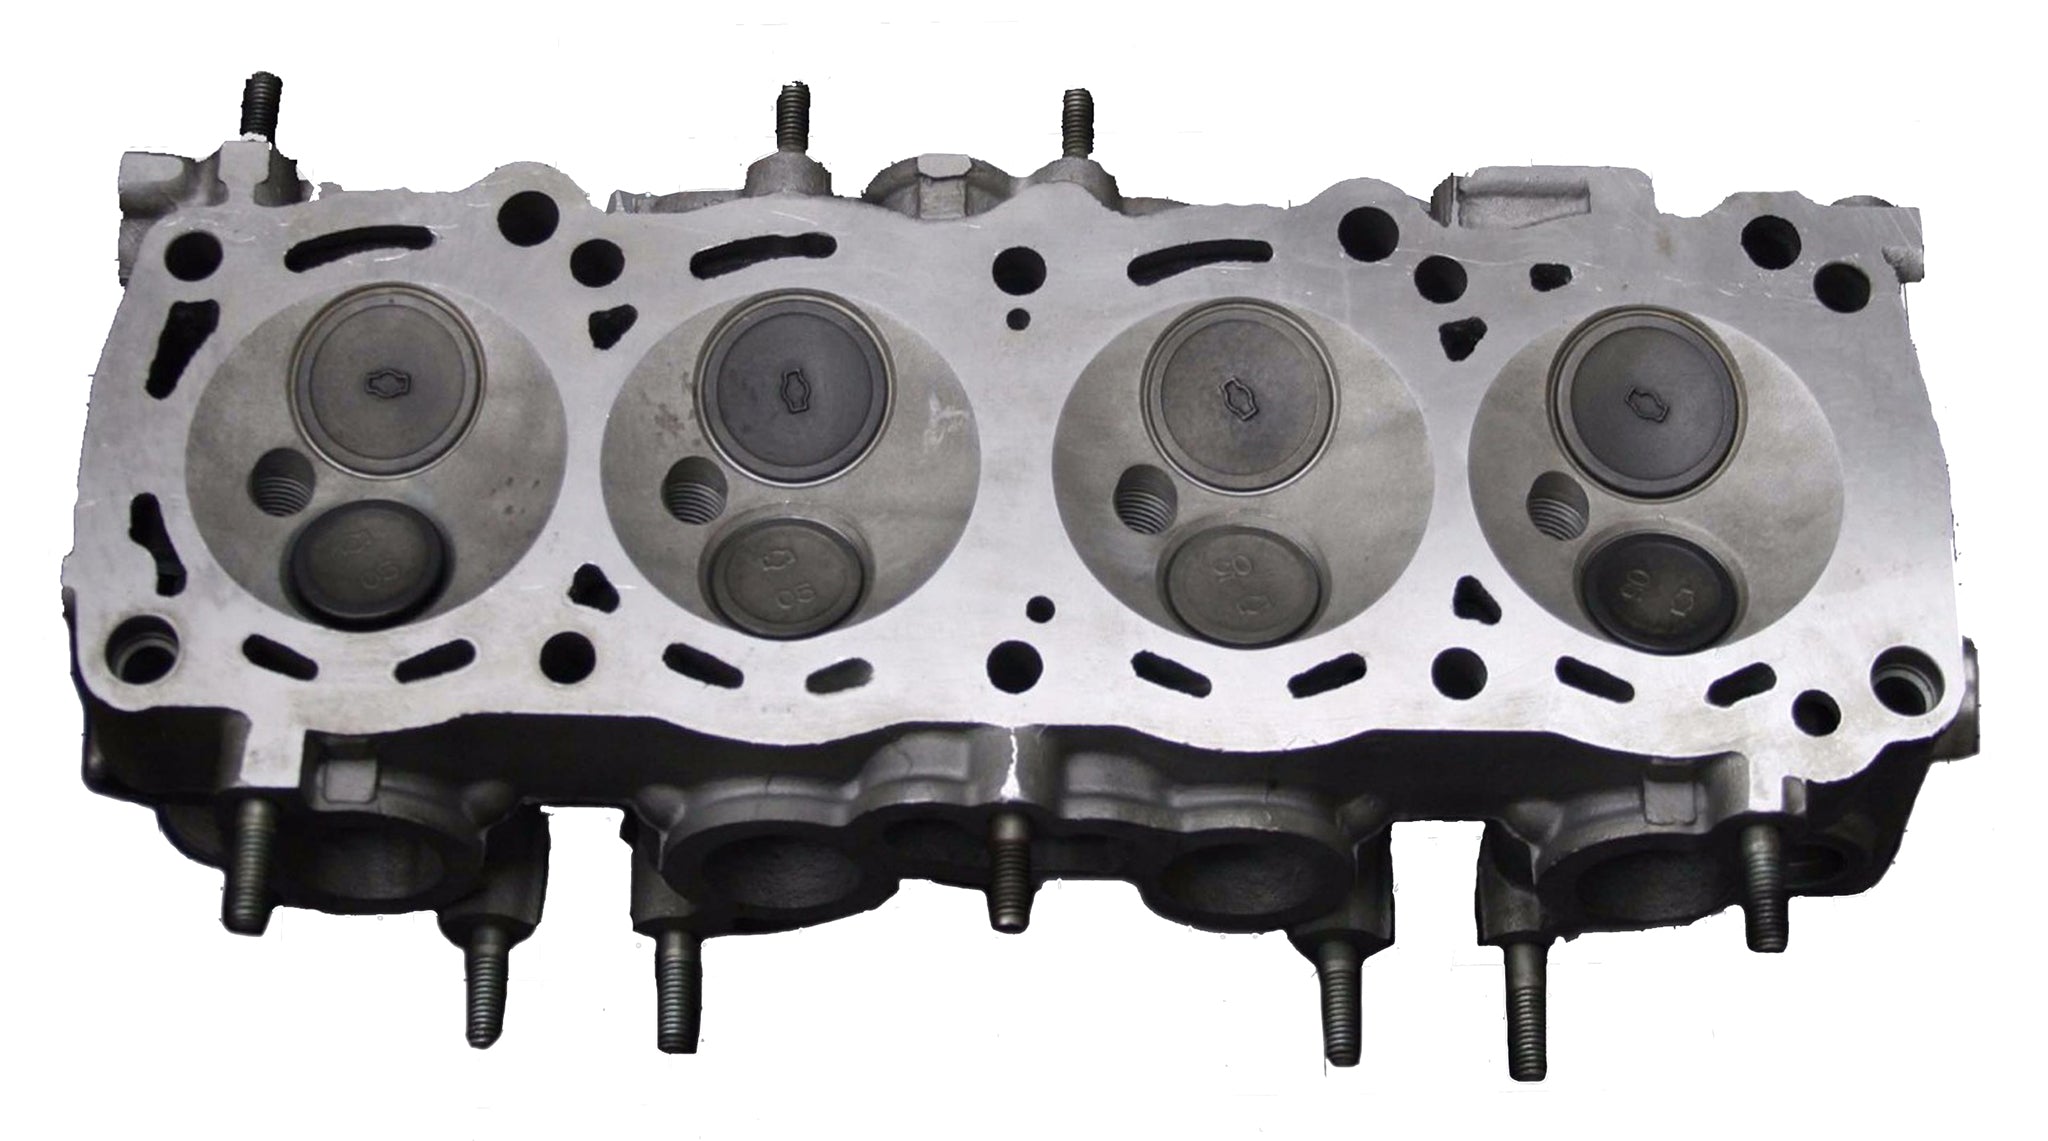 1983-1987 Nissan Pulsar, Sentra 1.6L E16 cylinder head cast # 52M Round Combustion Chamber